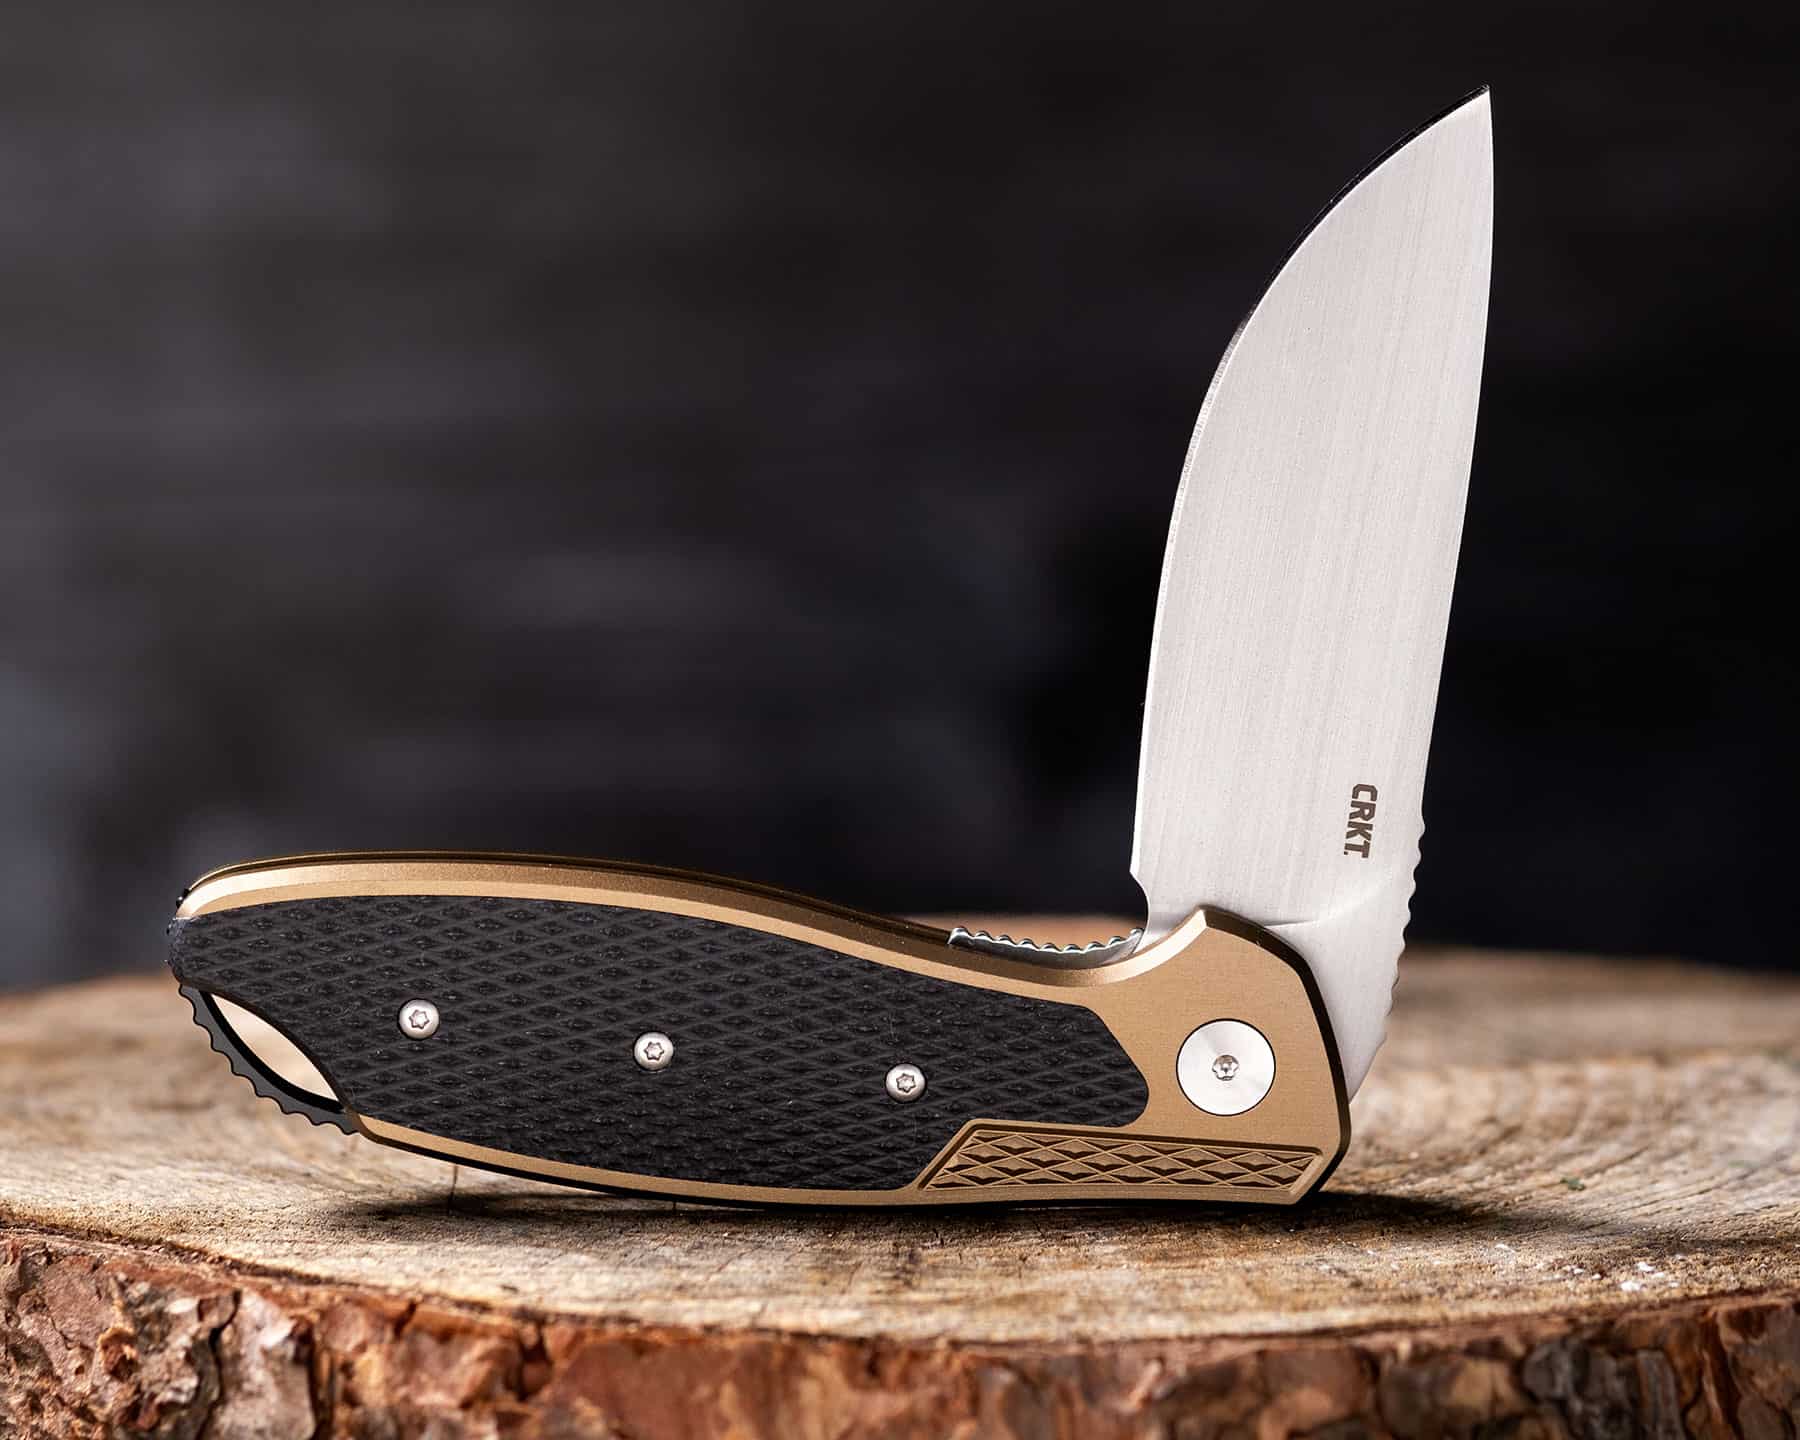 The CRKT Jake is a simple but smooth-flipping working knife that looks and feels like a less involved version of the CRKT Homefront.